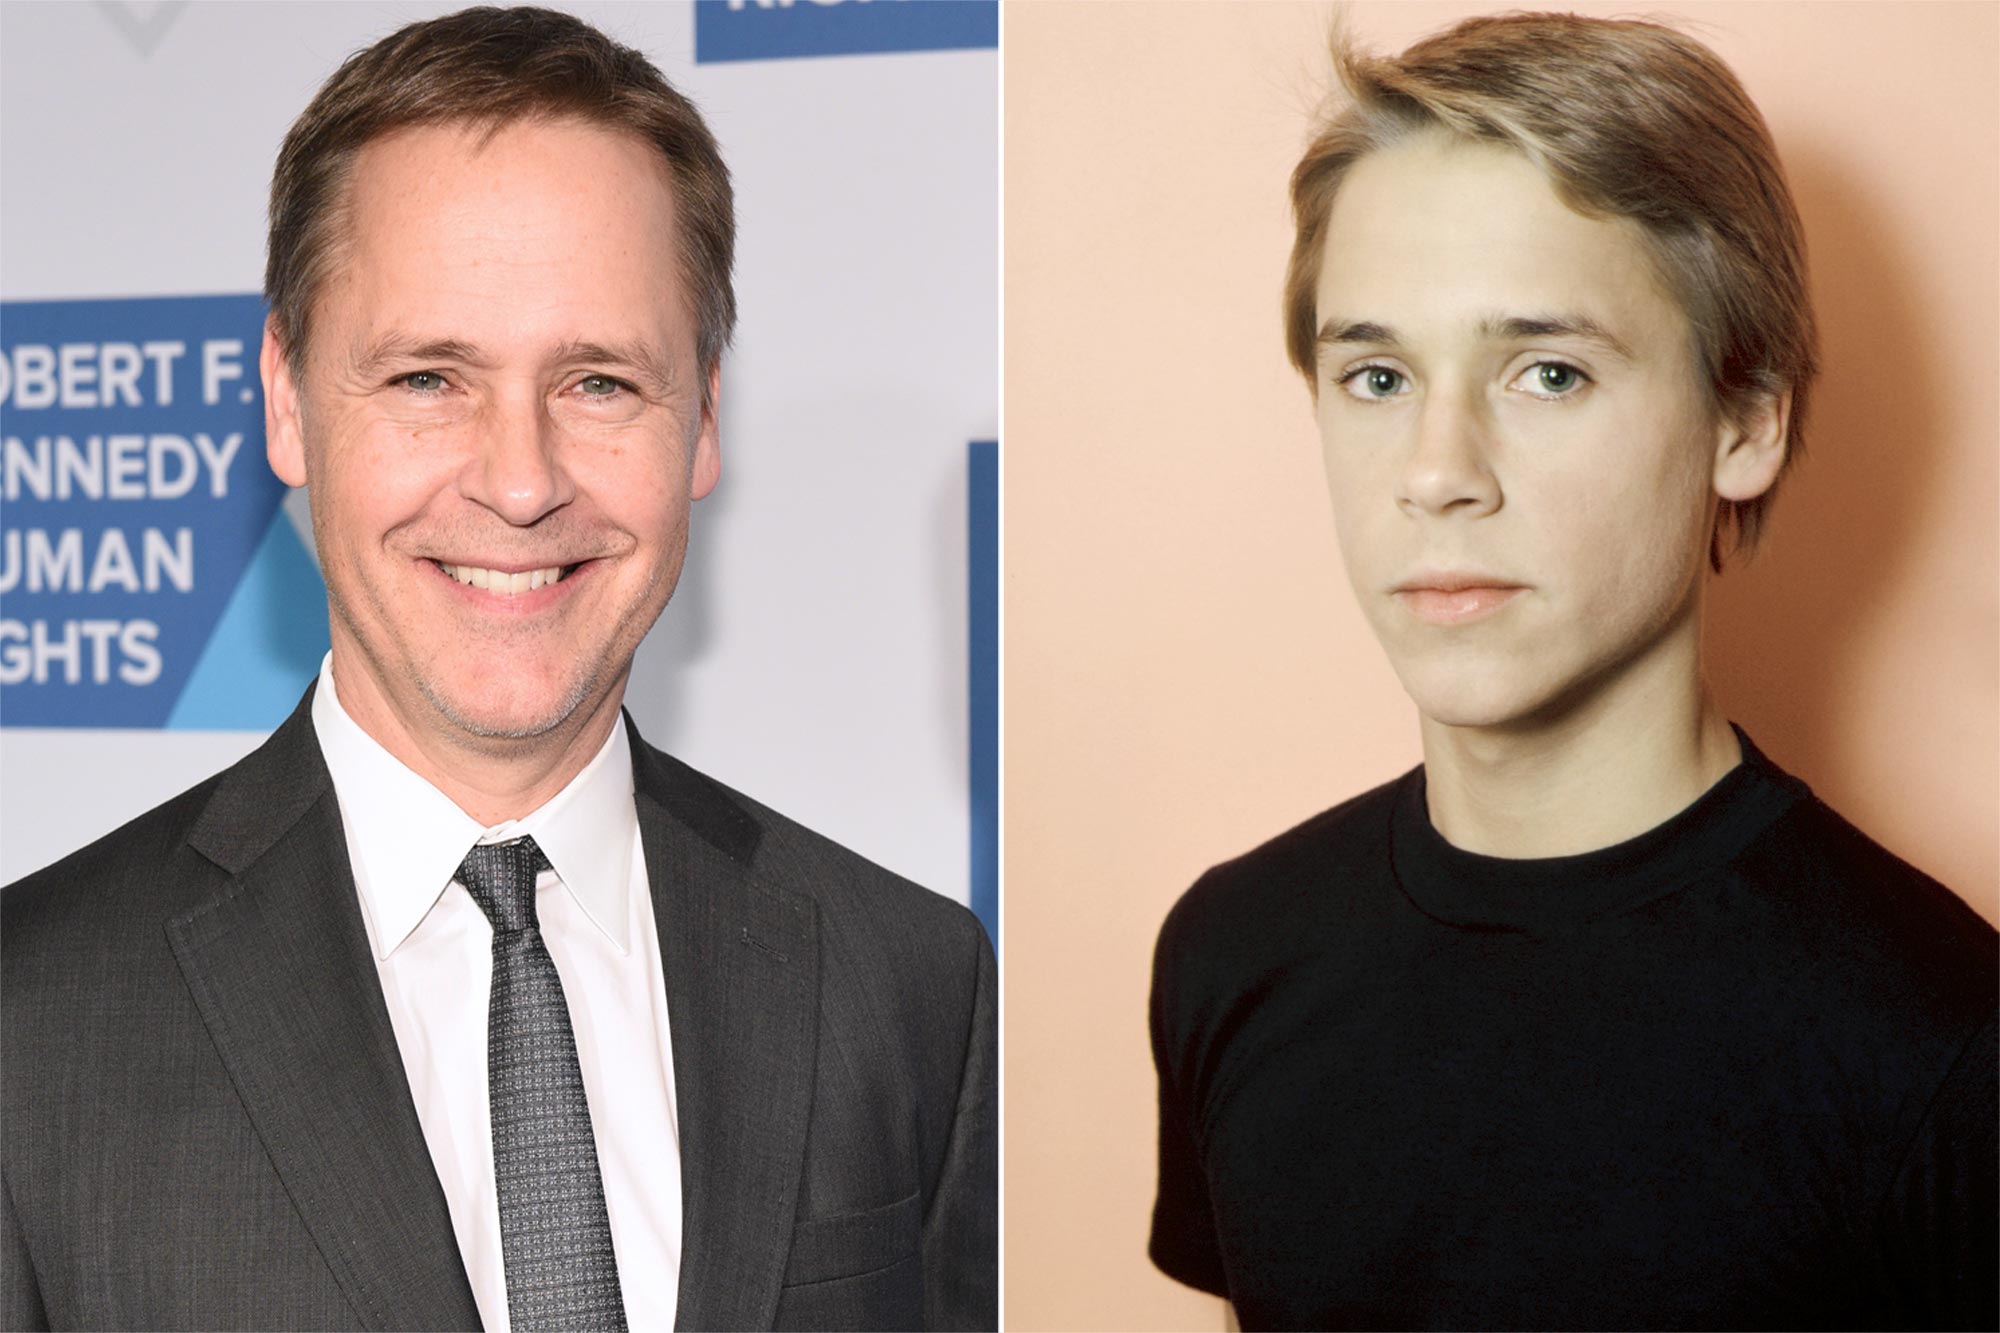 Chad Lowe recalls the fallout from walking off his hit show Spencer at 15 years old